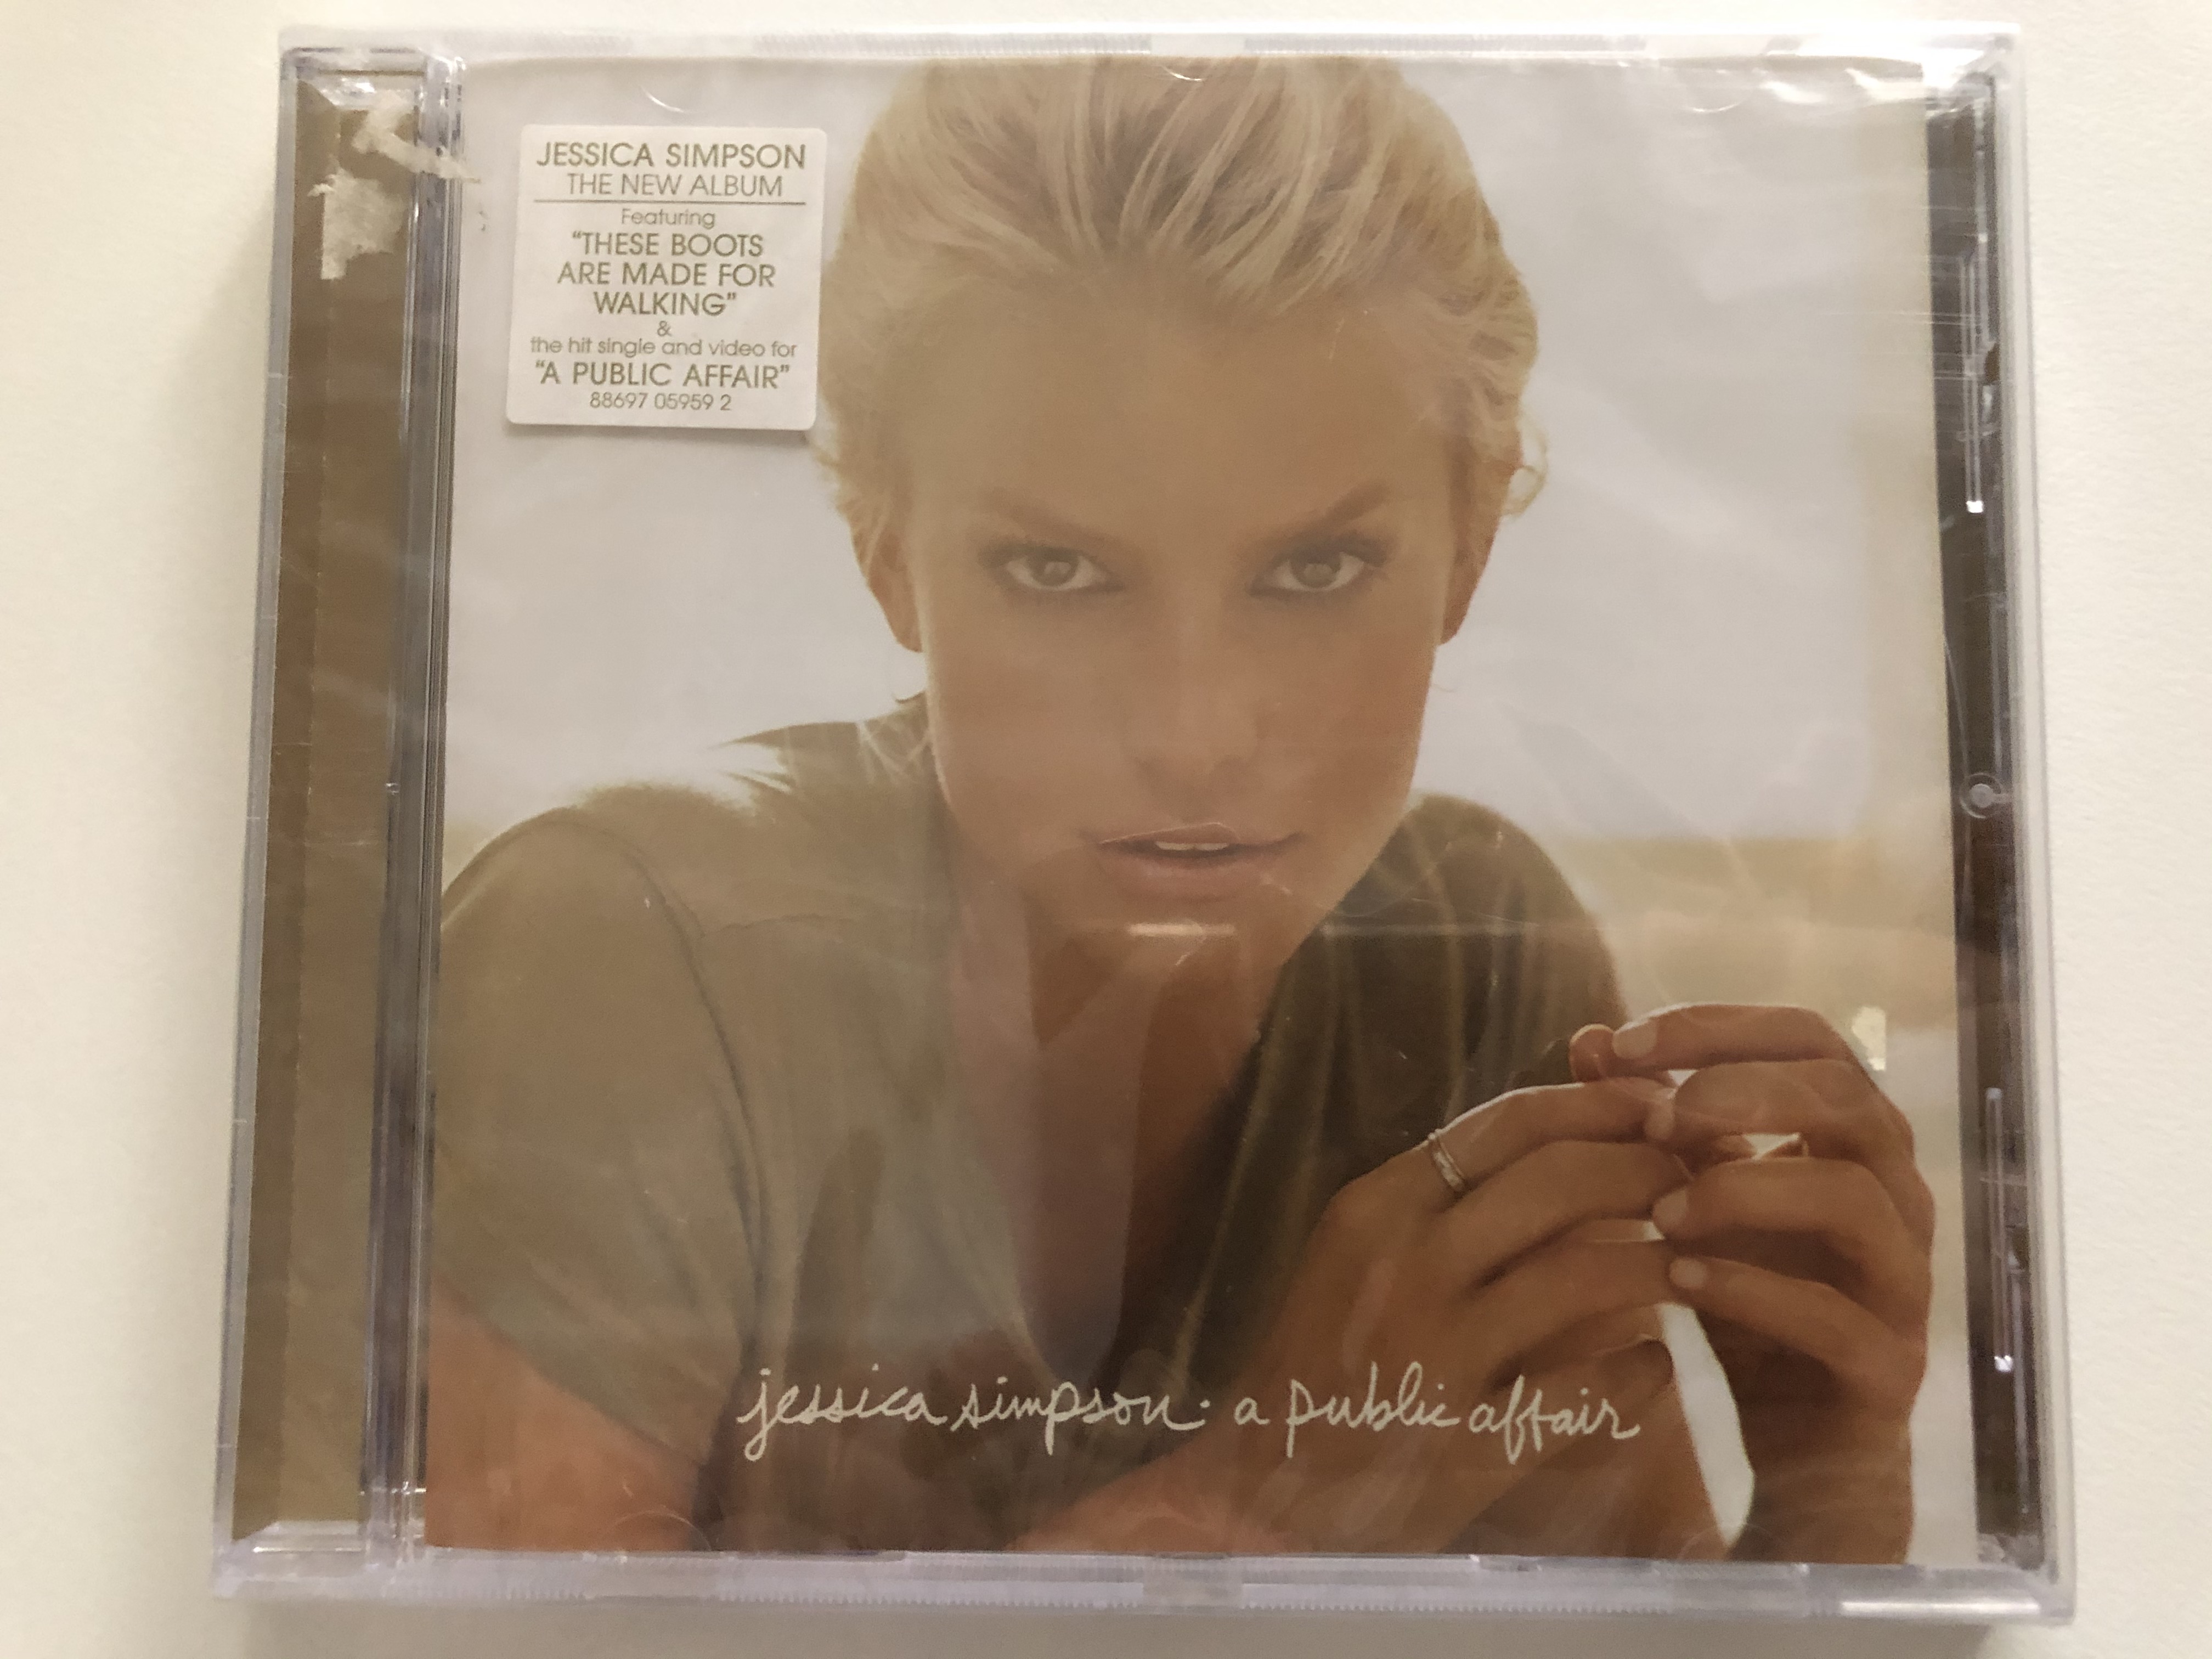 jessica-simpson-a-public-affair-the-new-album-featuring-these-boots-are-made-for-walking-the-hit-single-and-video-for-a-public-affair-sony-bmg-music-entertainment-audio-cd-2007-1-.jpg